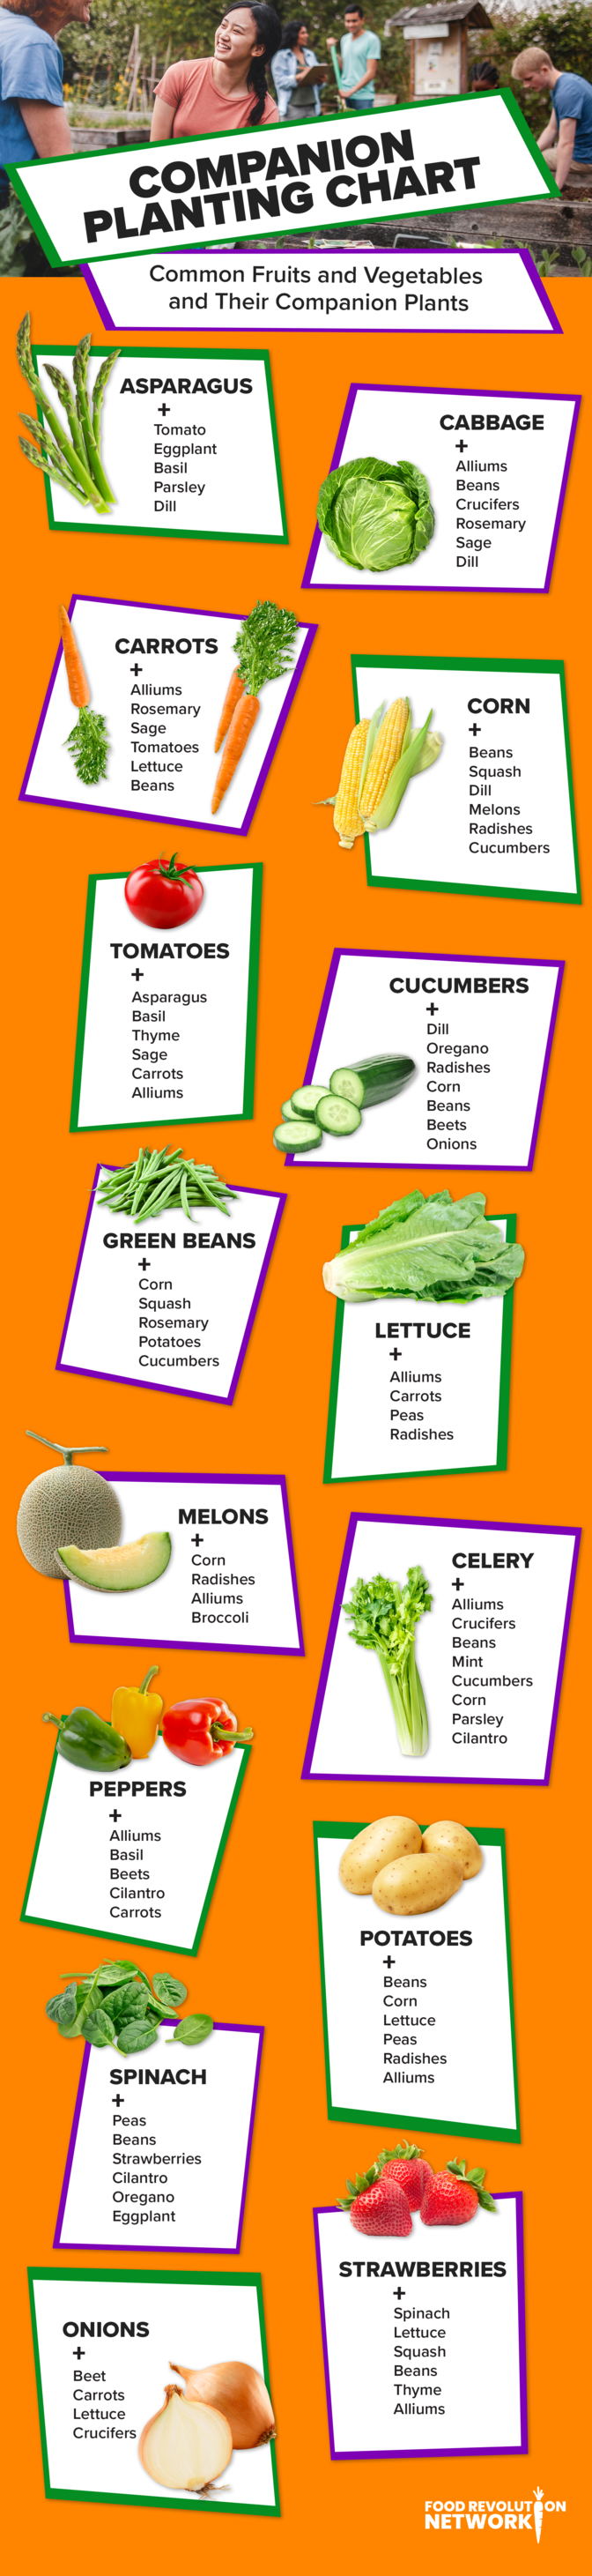 Companion Planting Chart: Common Fruits and Vegetables and the Companion Plants That Benefit Them